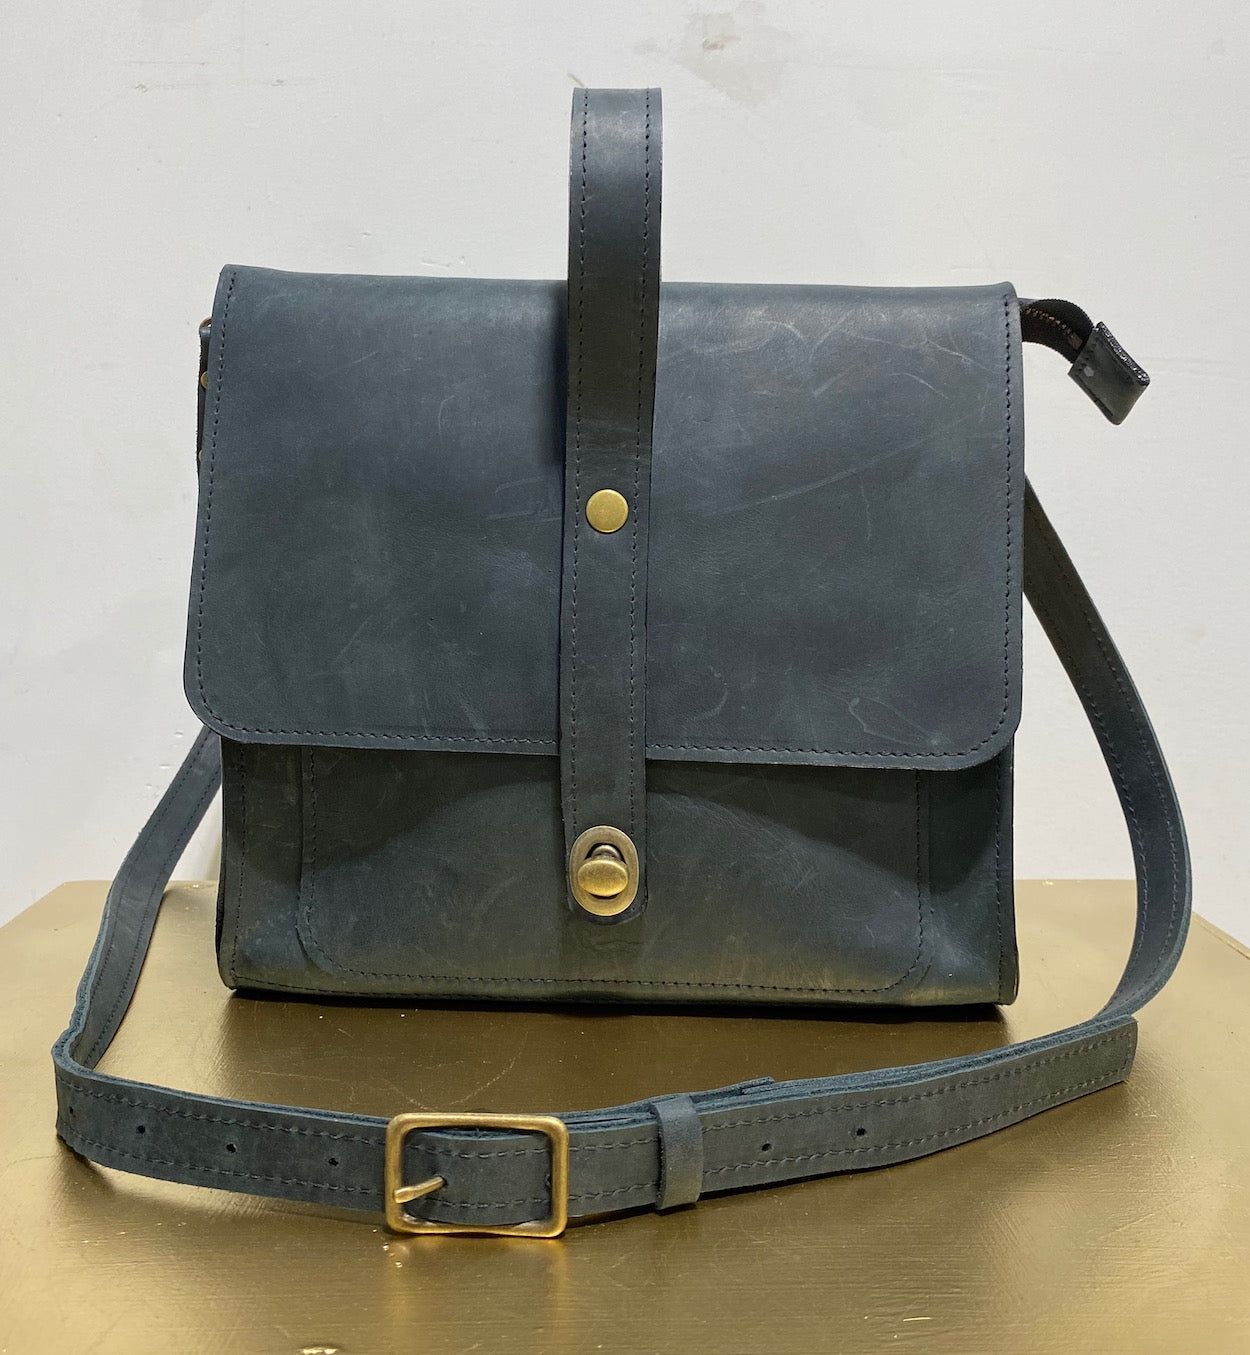 Leather Satchel Purse in Black